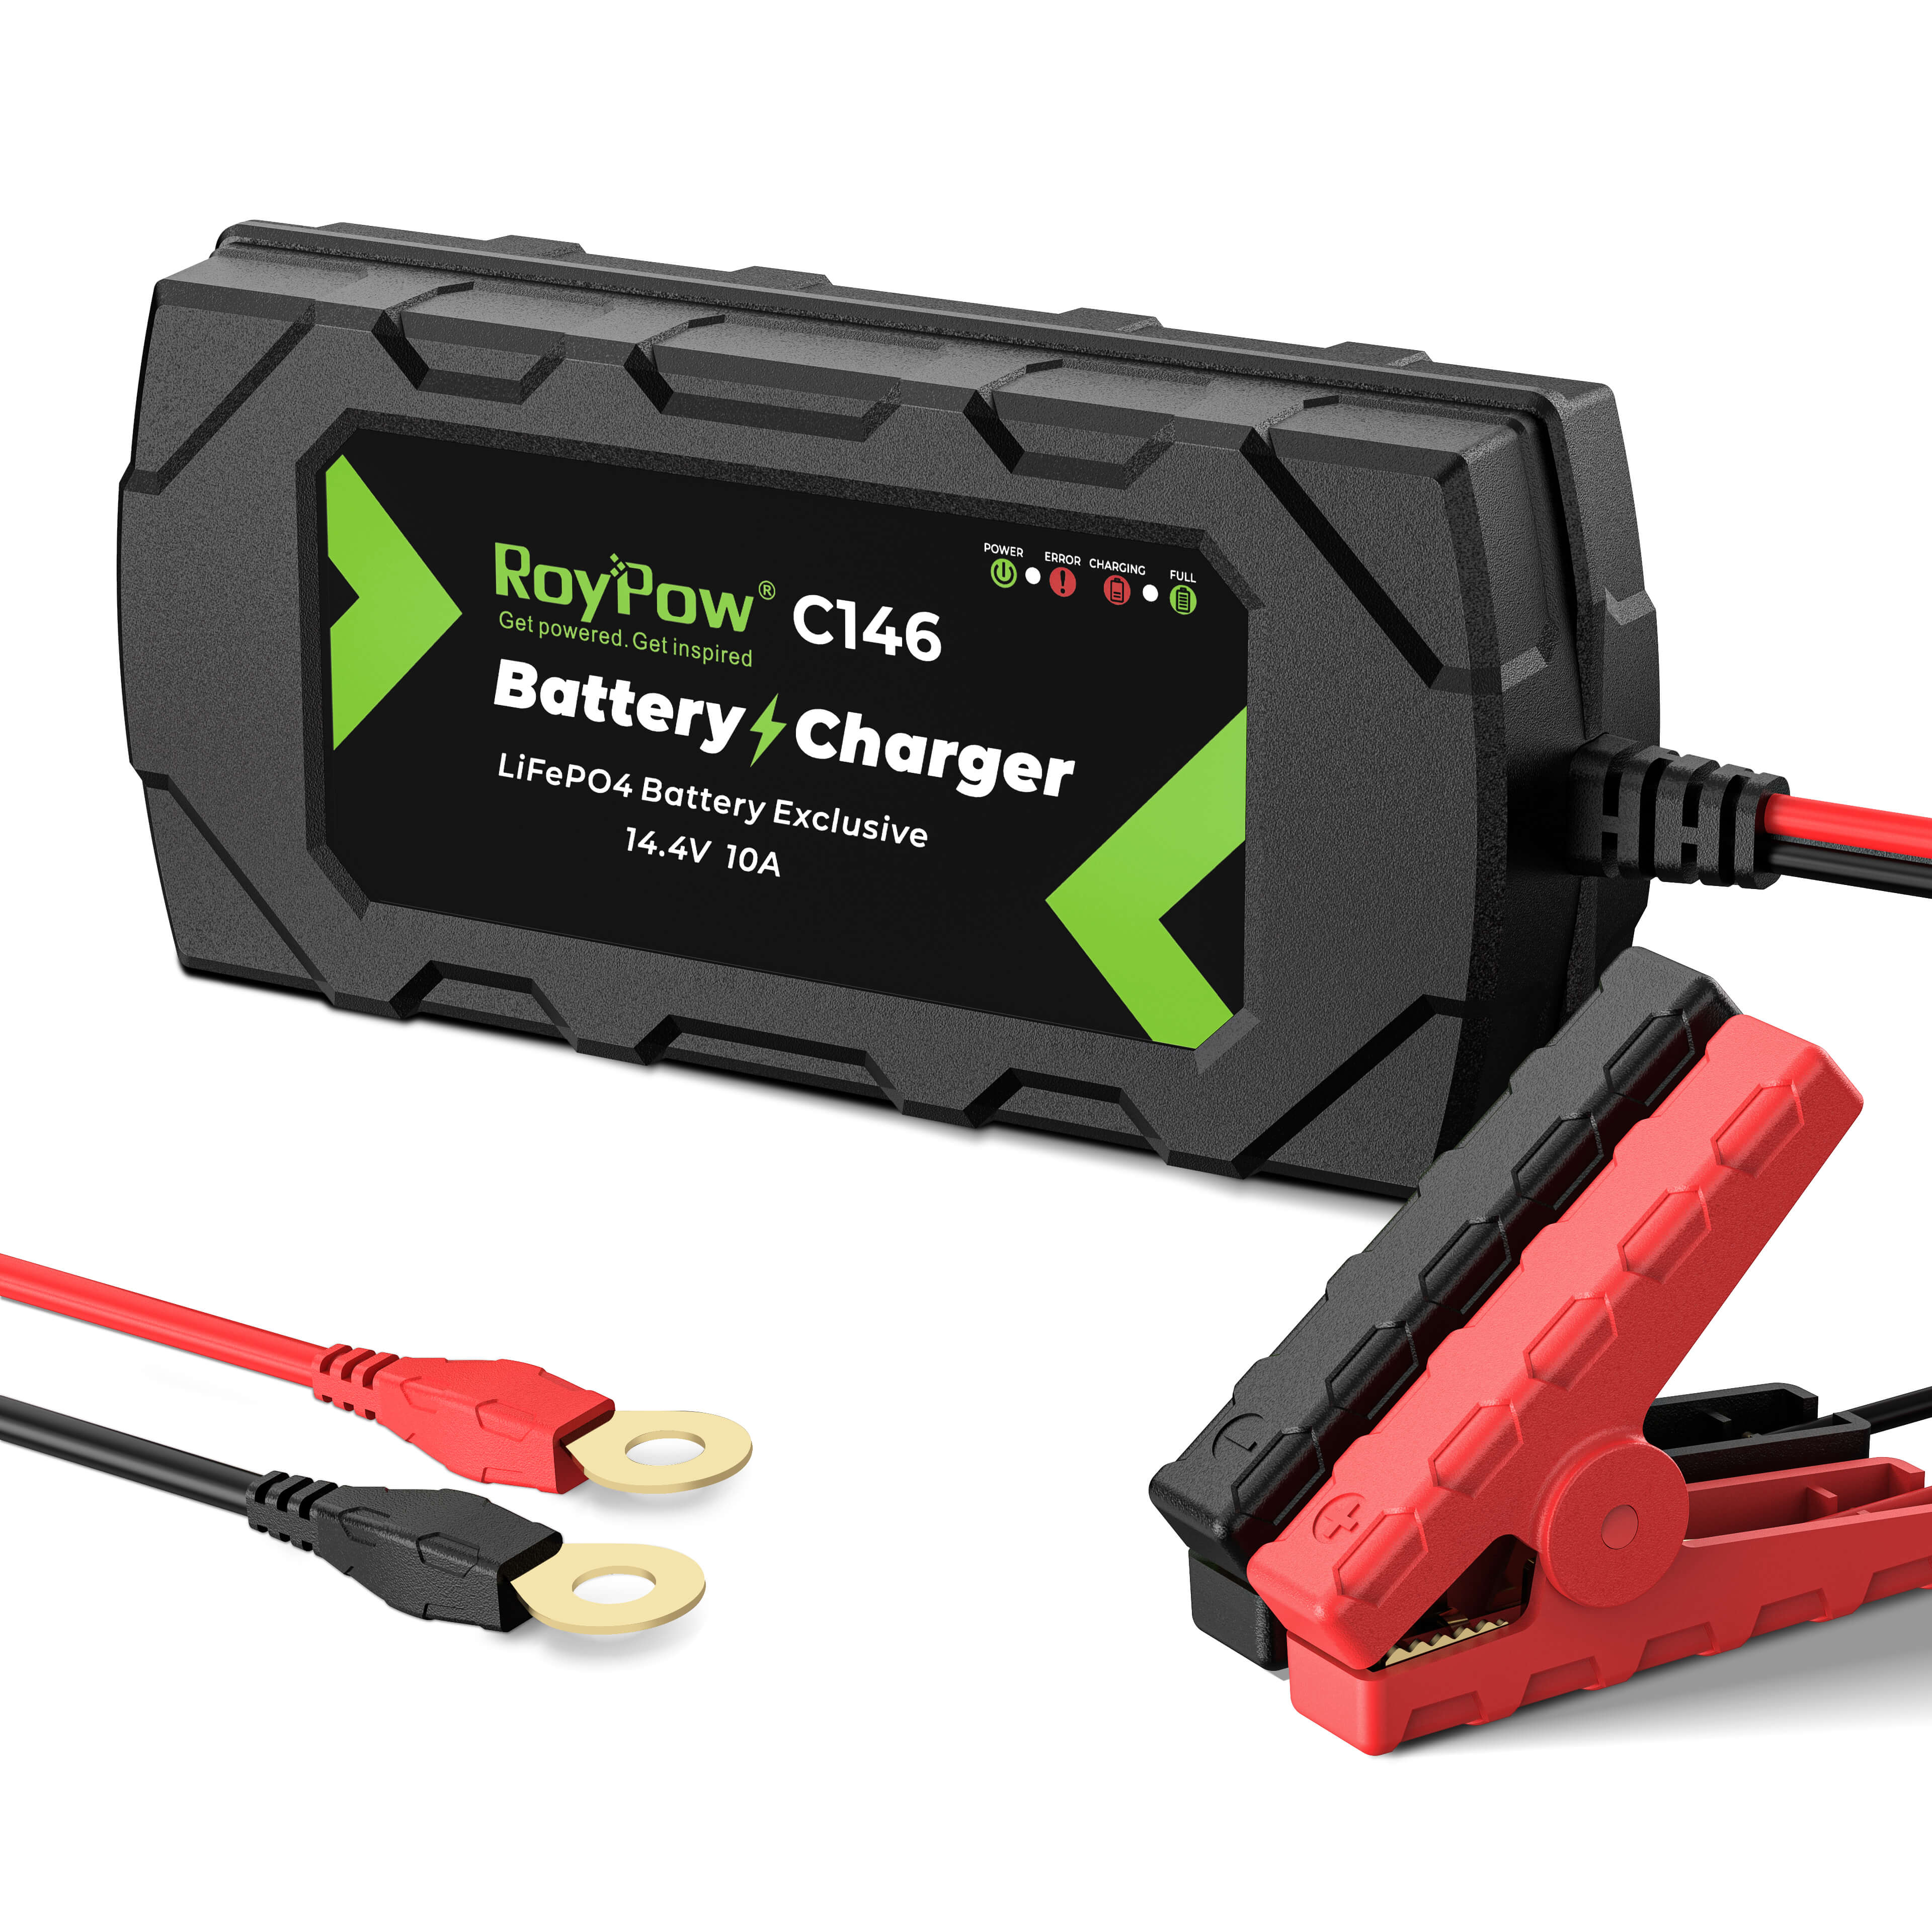 14.4V 10A LiFePO4 Battery Charger 02